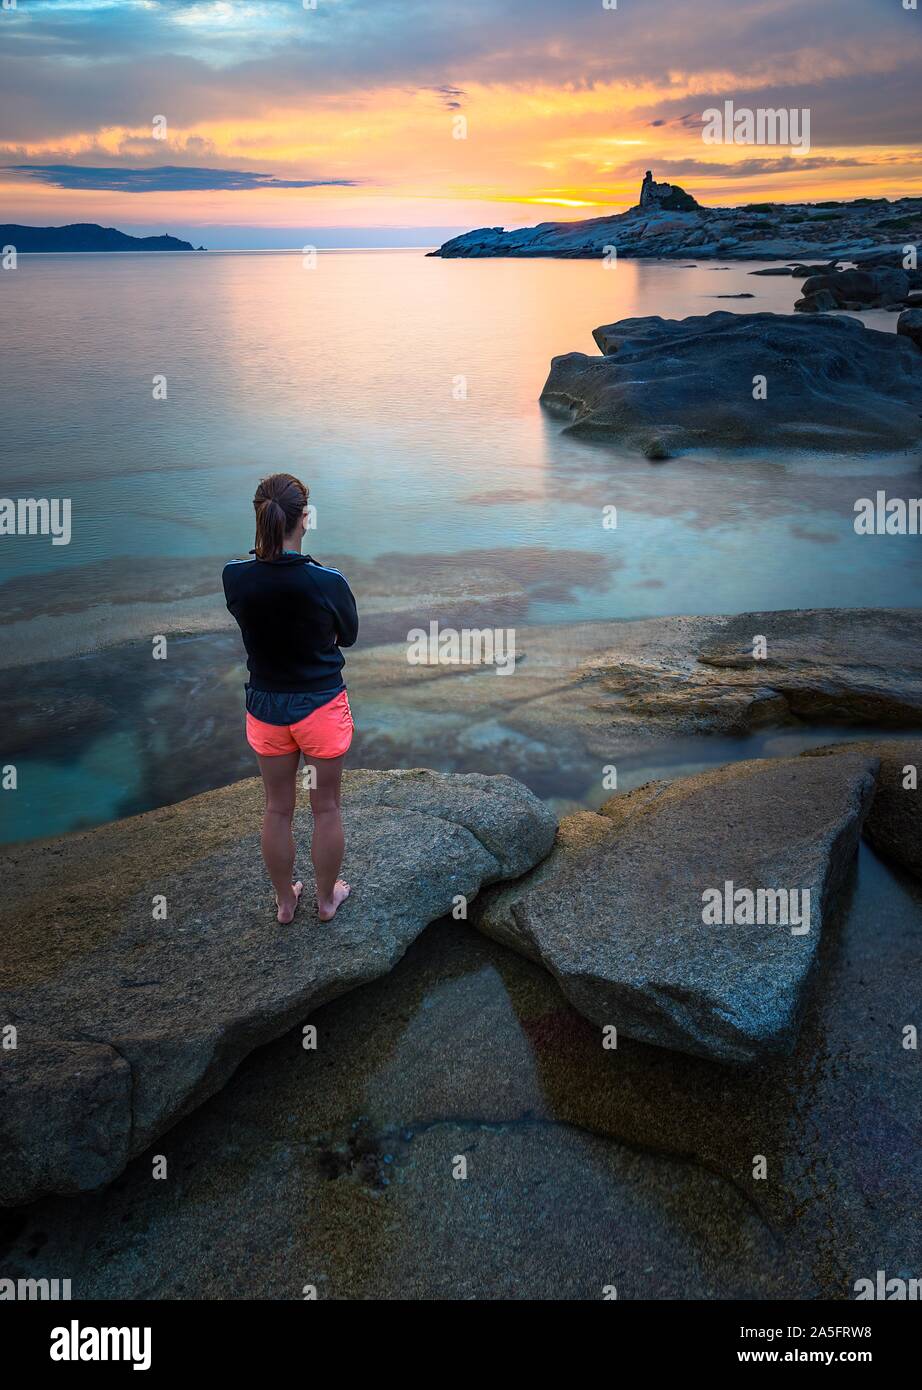 Woman standing on beach looking at view at sunset, Corsica, France Stock Photo